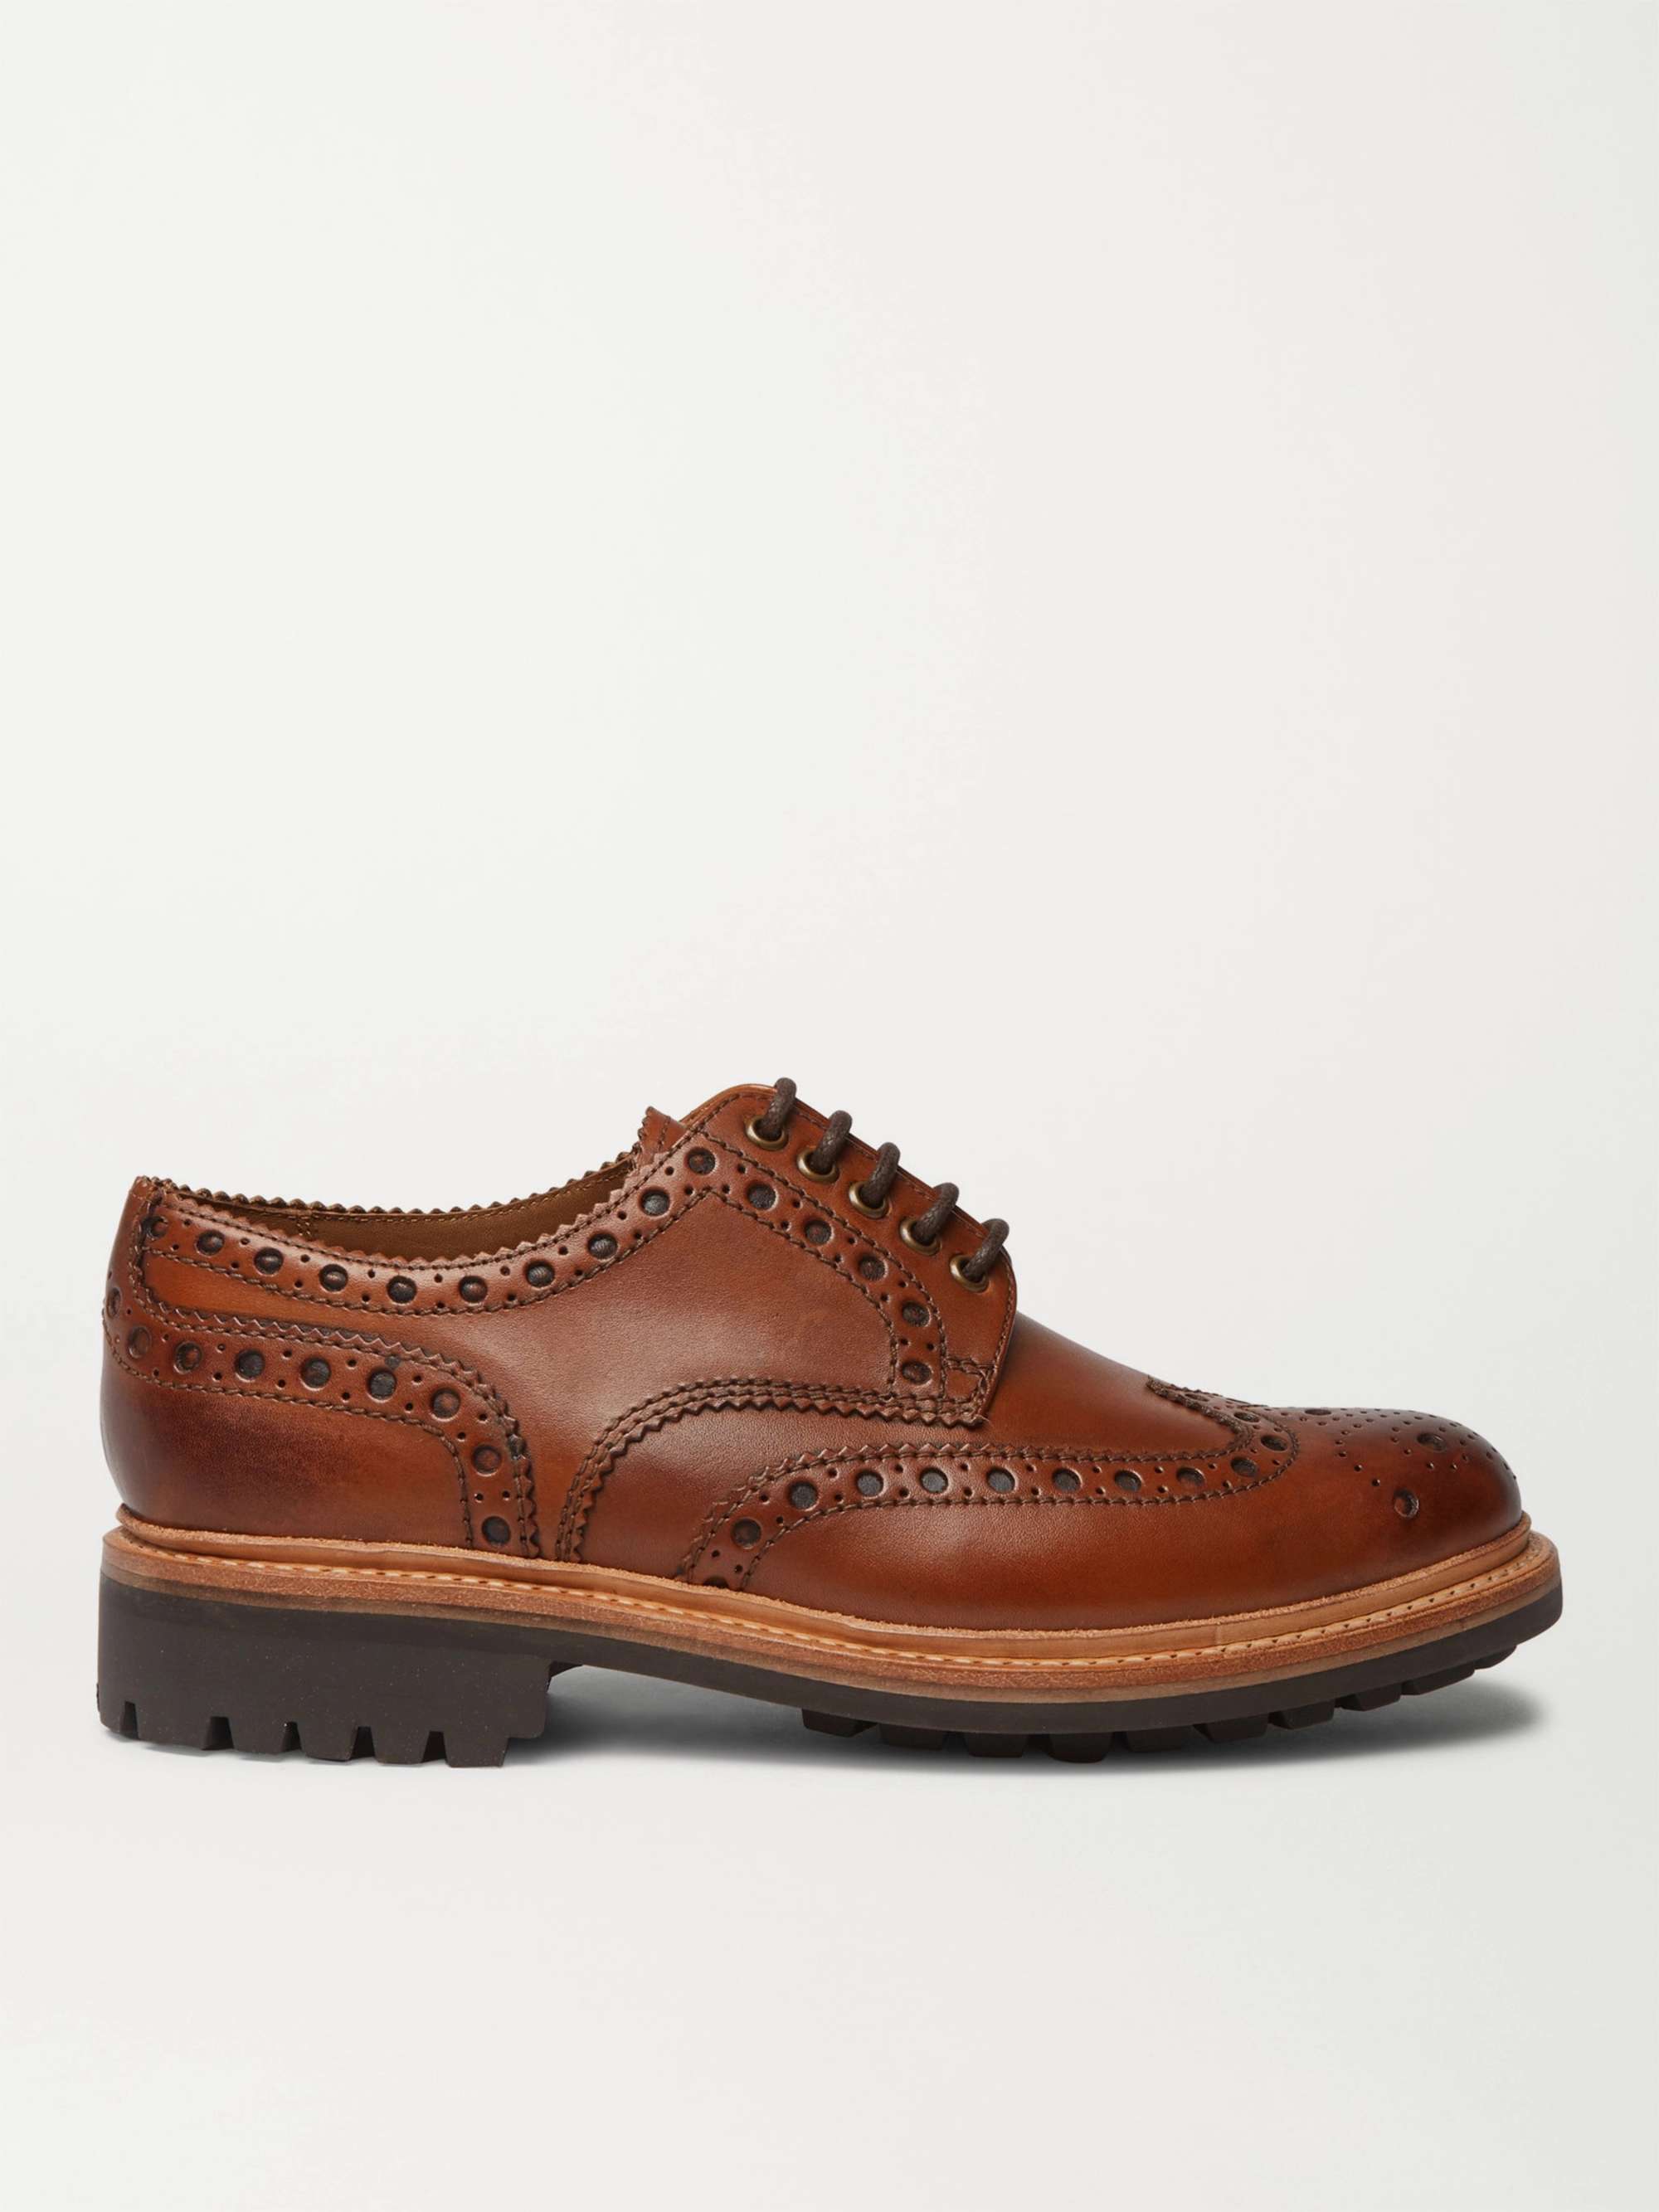 GRENSON Archie Leather Wingtip Brogues